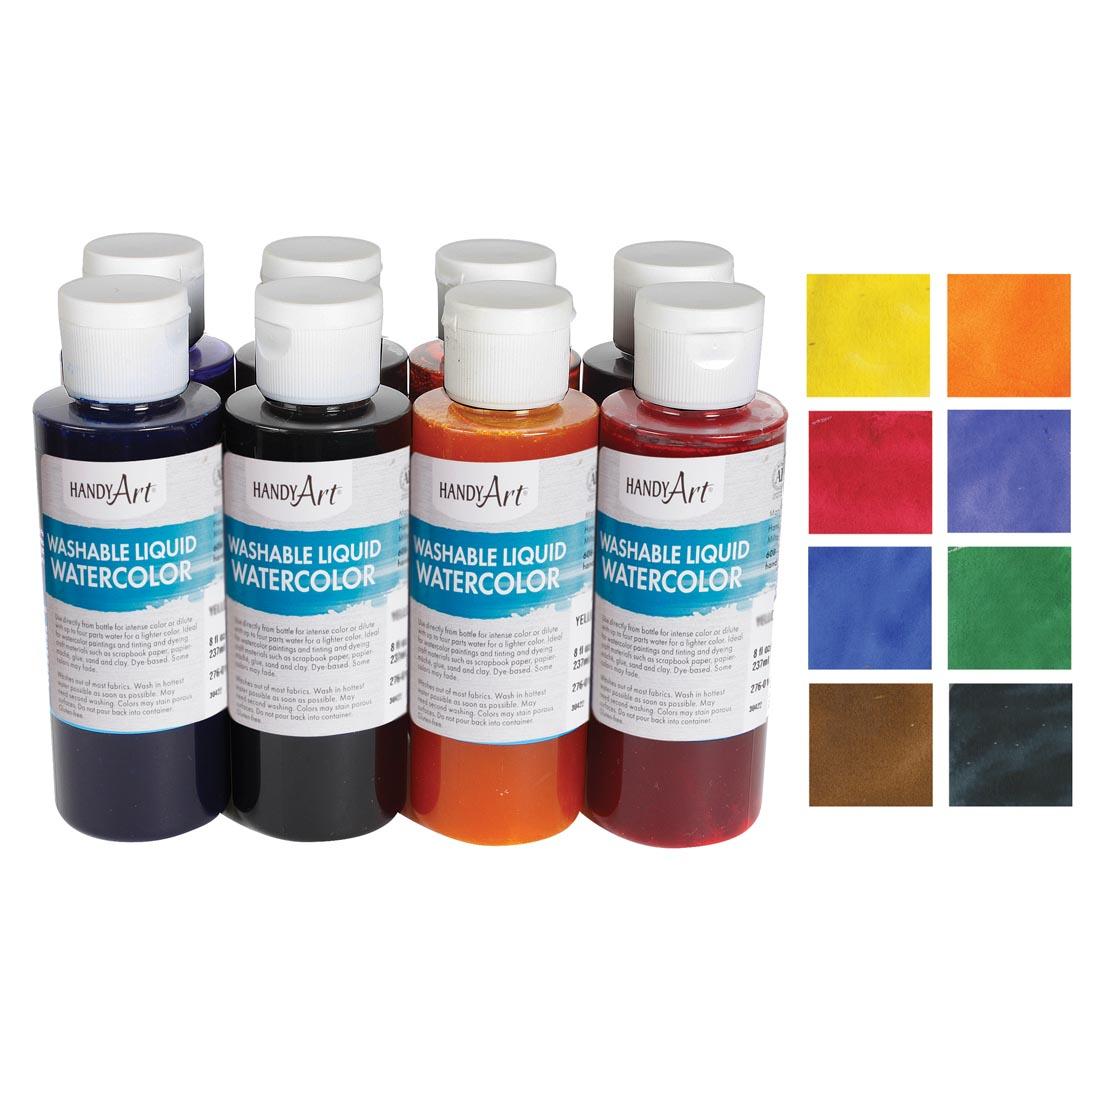 Bottles of the Handy Art Washable Liquid Watercolors 8-Color Set beside their color swatches